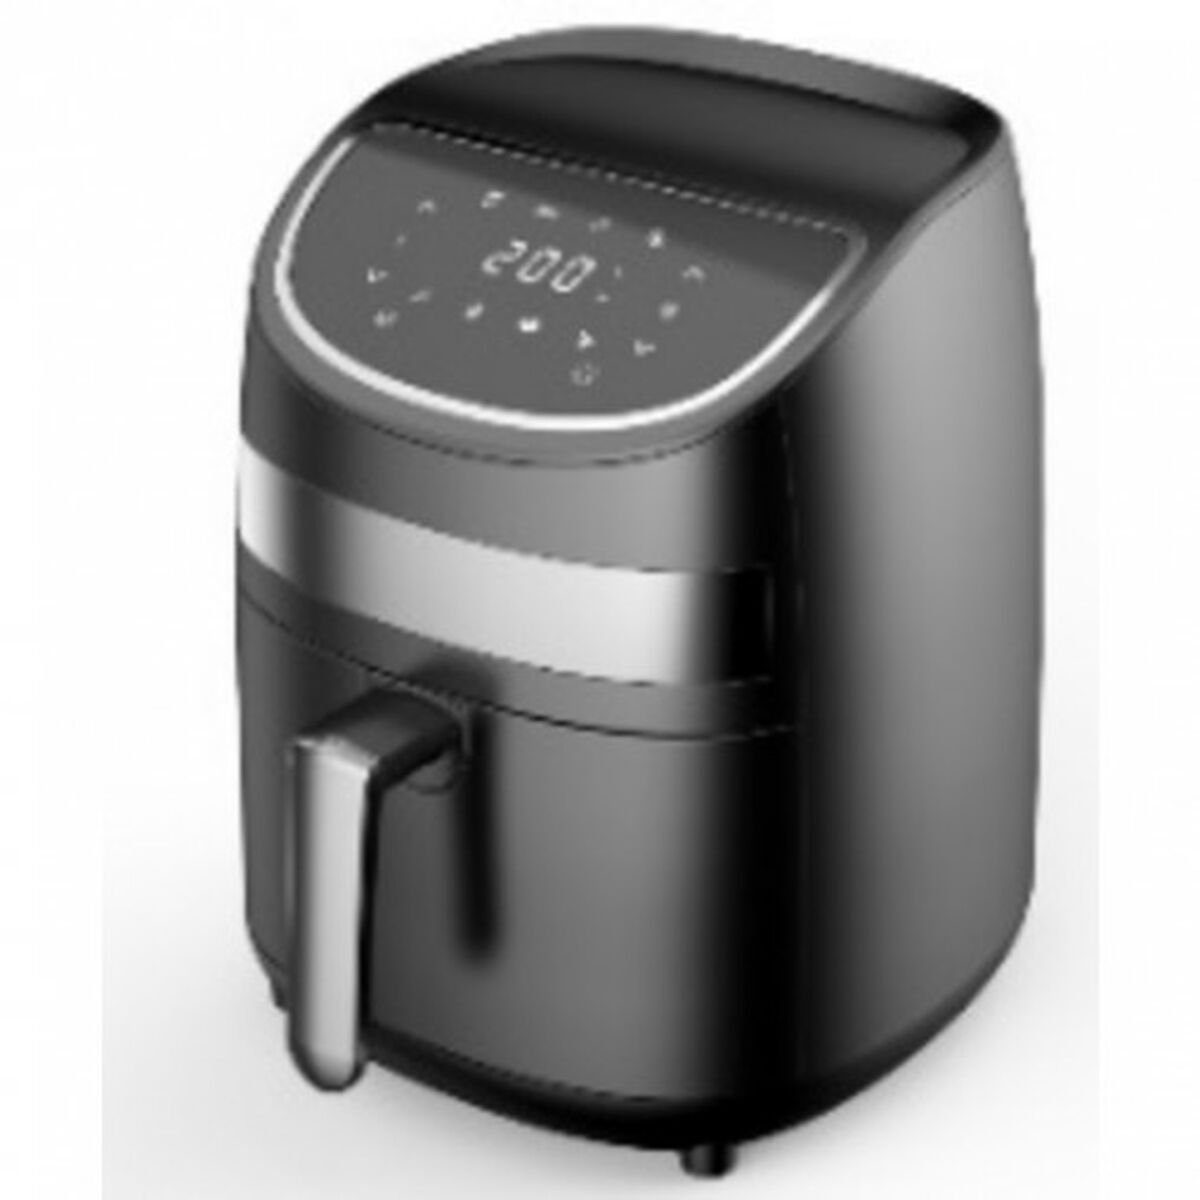 1200 COMELEC W ohne Fritteuse Heißluft FA4040, Airfryer Comelec Öl Fritteuse